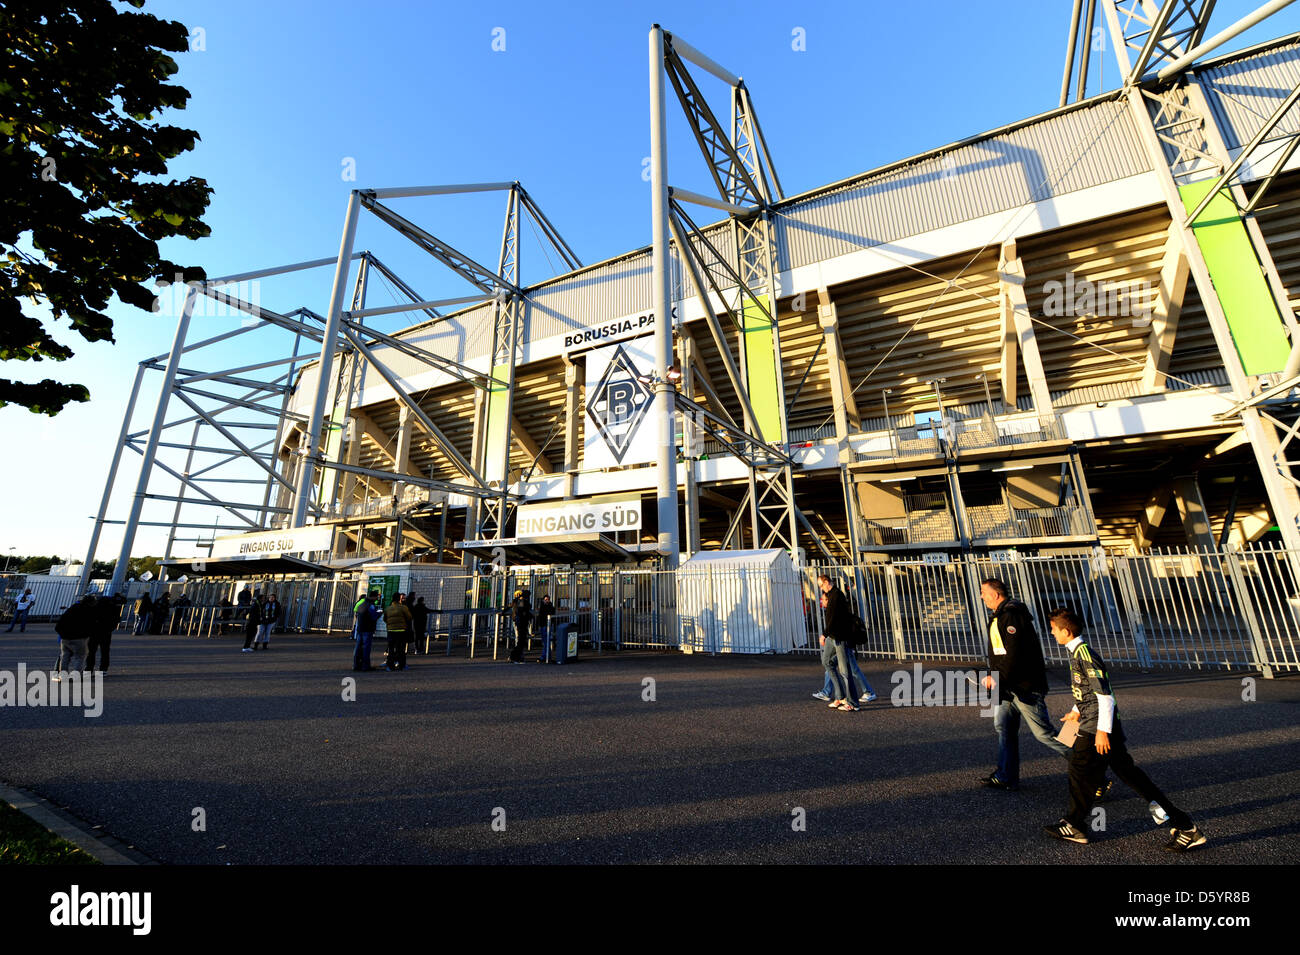 Soccer fans arrive at the Borussia Park soccer stadium to watch the Europa League match between Borussia Moenchengladbach and Fenerbahce Istanbul in Moenchengladbach, Germany, 4 October 2012. Photo: Daniel Naupold Stock Photo